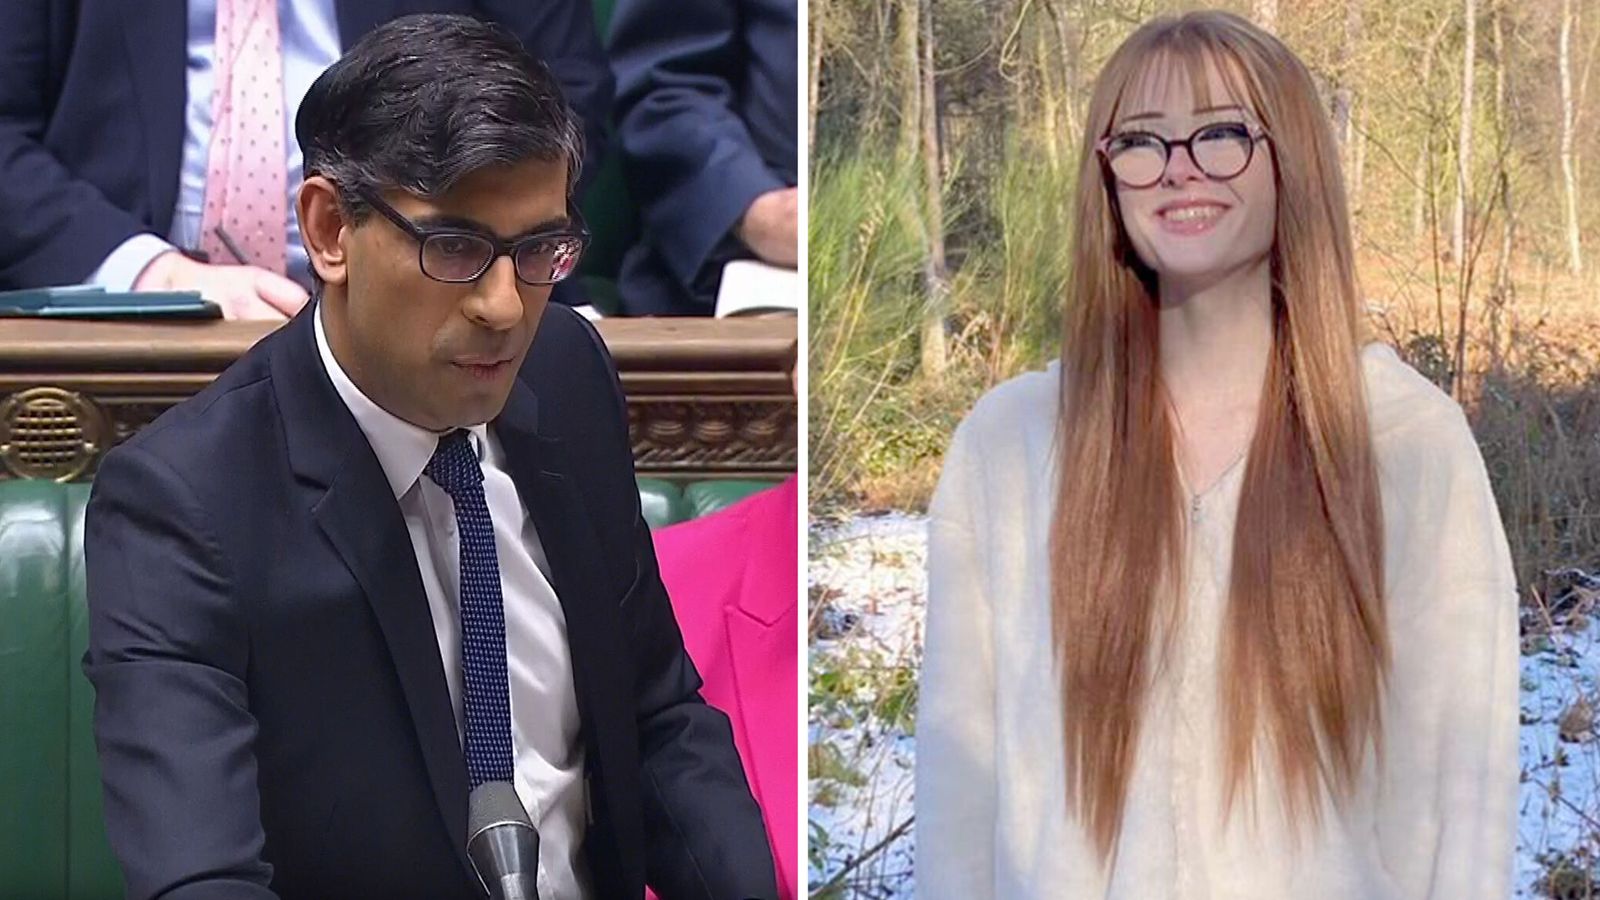 'Shame': Sunak criticised for making transgender dig at Starmer in Commons - on day Brianna Ghey's mother came to PMQs